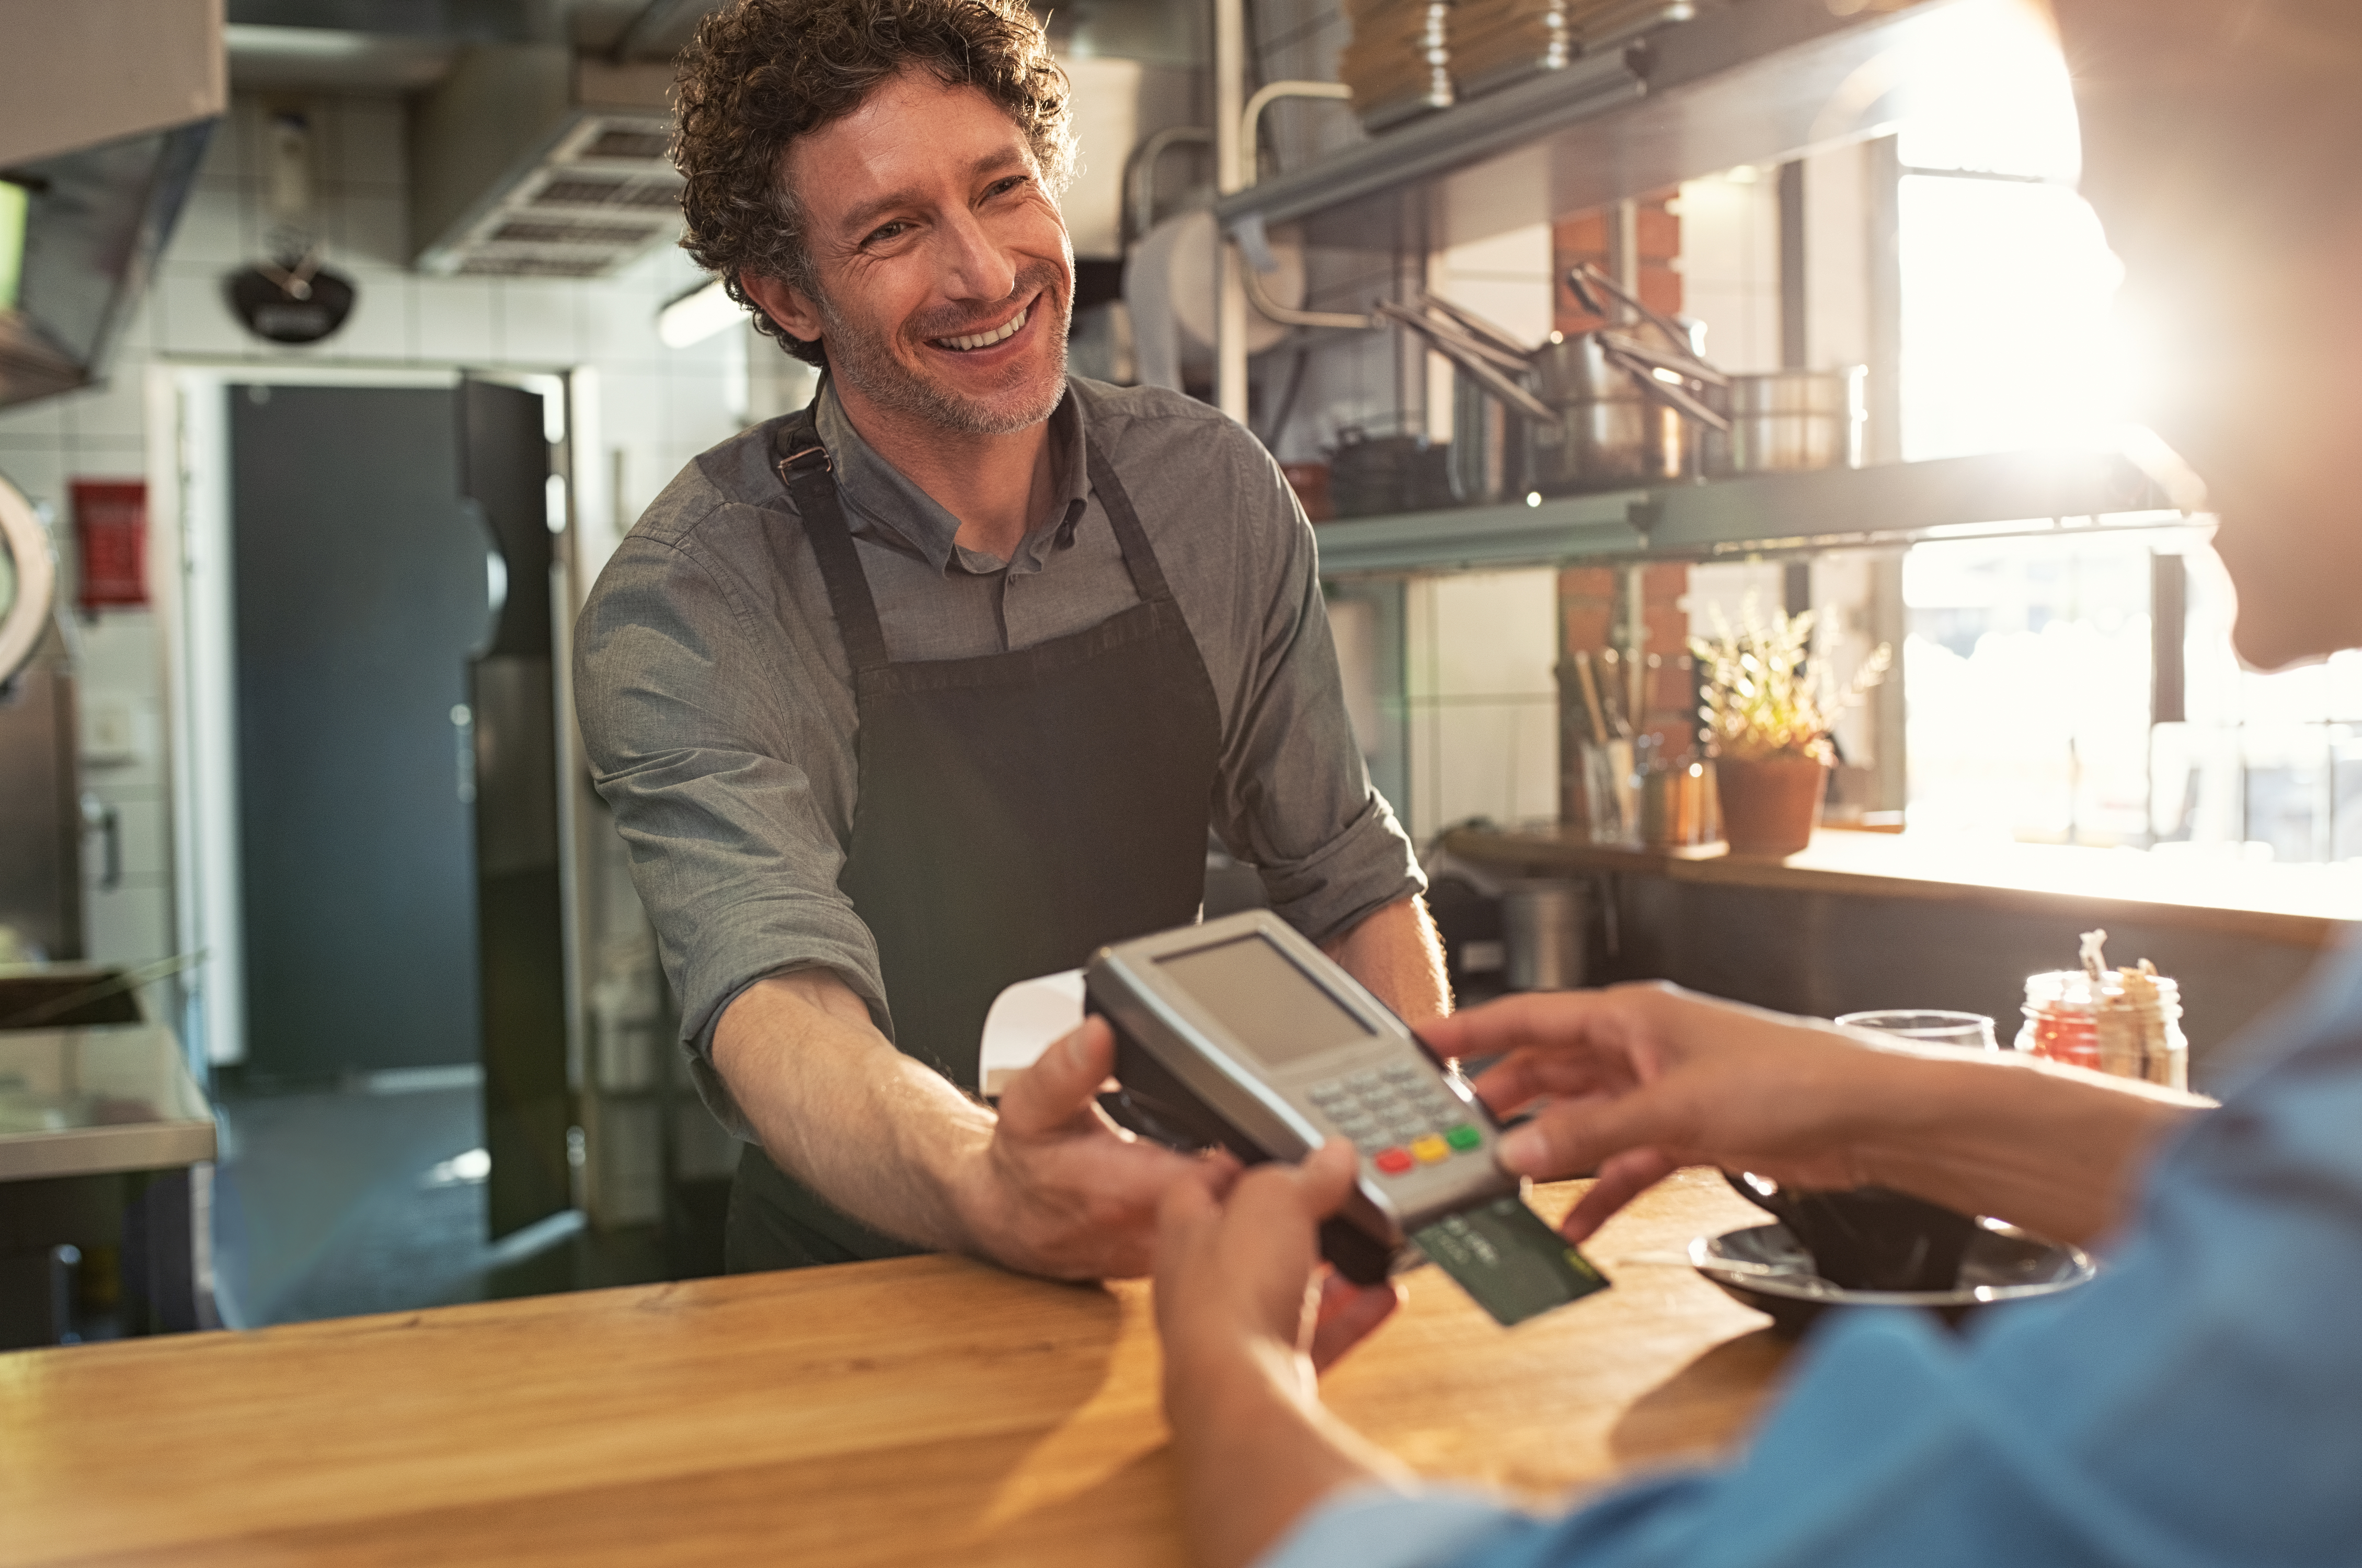 Should a service charge count as gratuity?